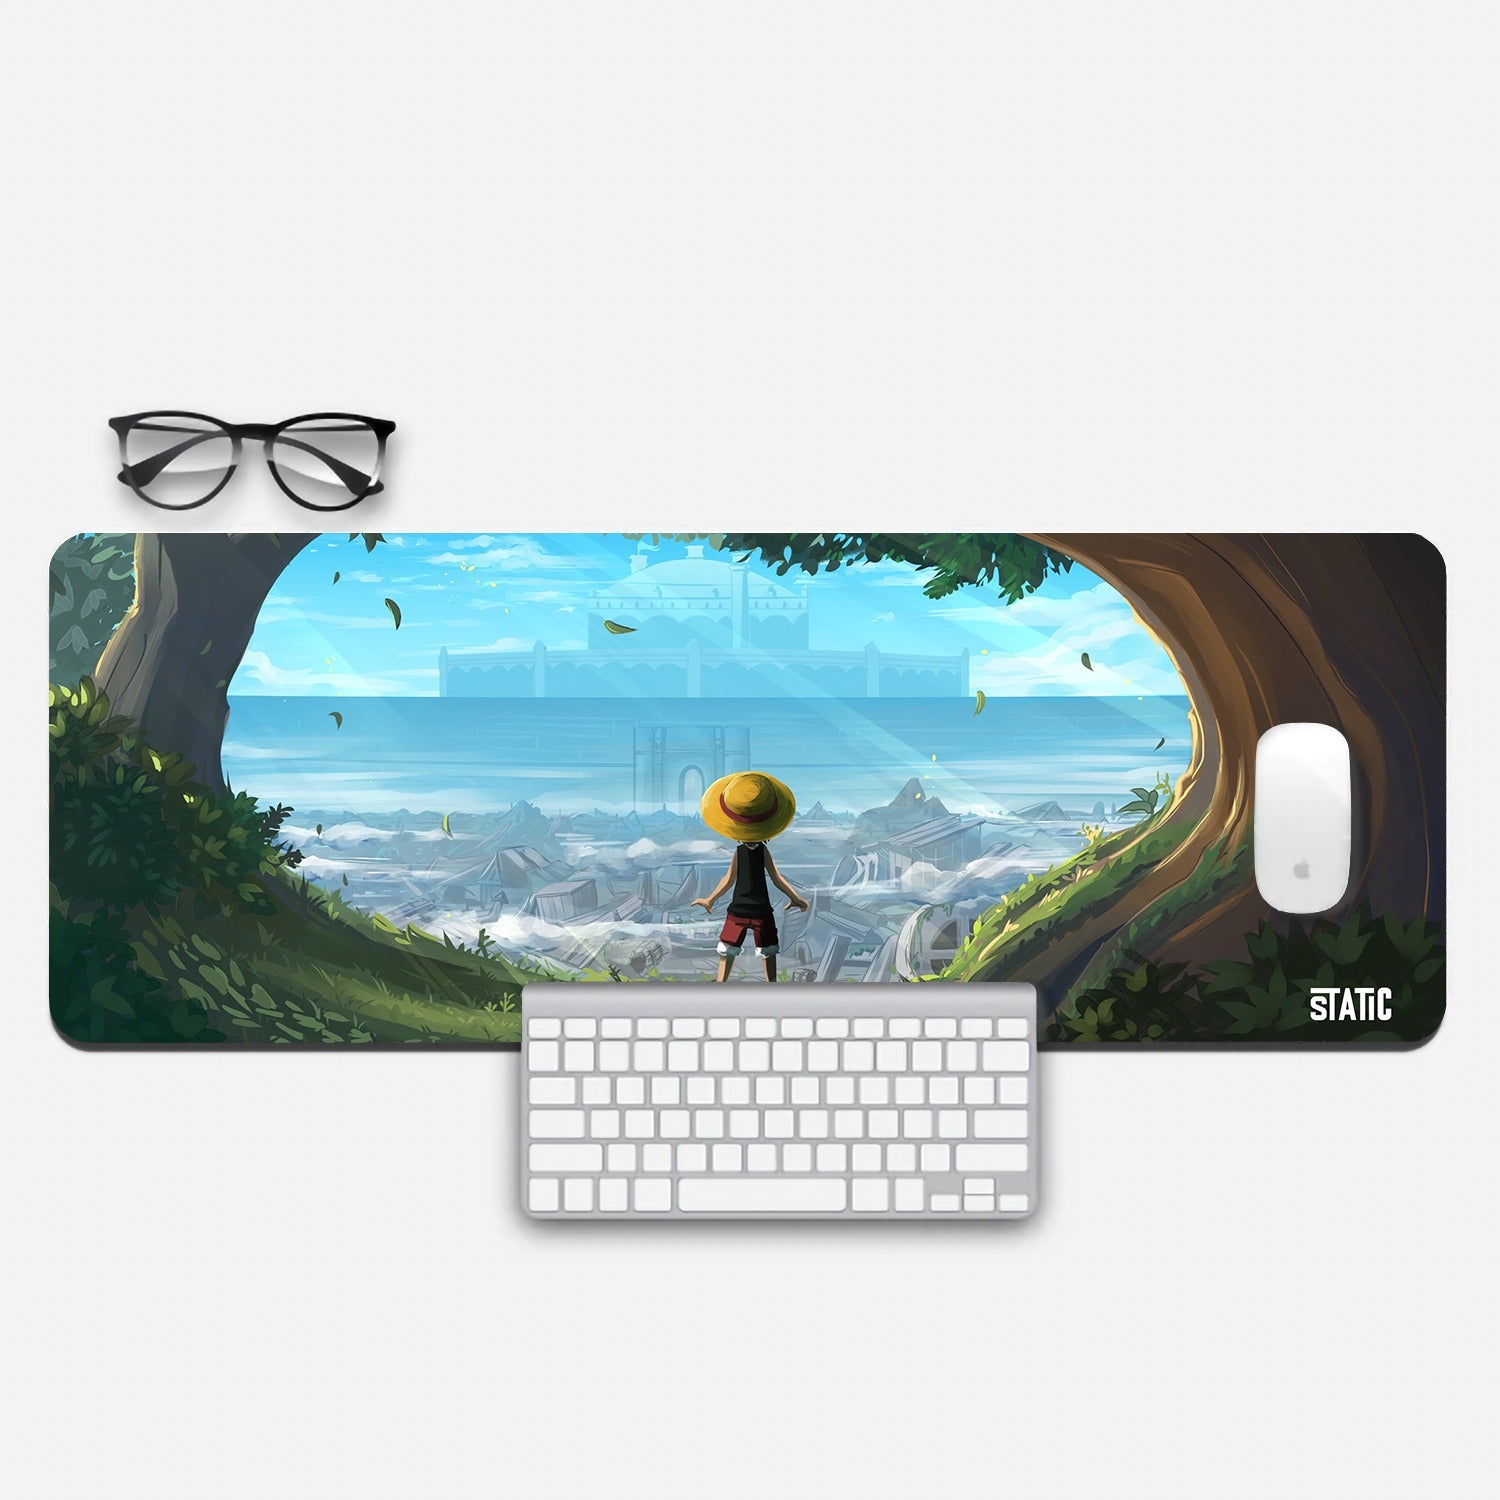 Explore the World of One Piece with Our Extended Gaming Mouse Pad  Dive into the epic world of One Piece with our extended gaming mouse pad featuring Kid Luffy. In this captivating design, Kid Luffy stands amidst towering trees in the forest, overlooking the wastelands beyond Goa Kingdom. The Goa Kingdom palace looms in the background, setting the stage for adventure. Immerse yourself in the grandeur of One Piece and elevate your gaming experience. Order now to embark on Luffy's legendary journey.